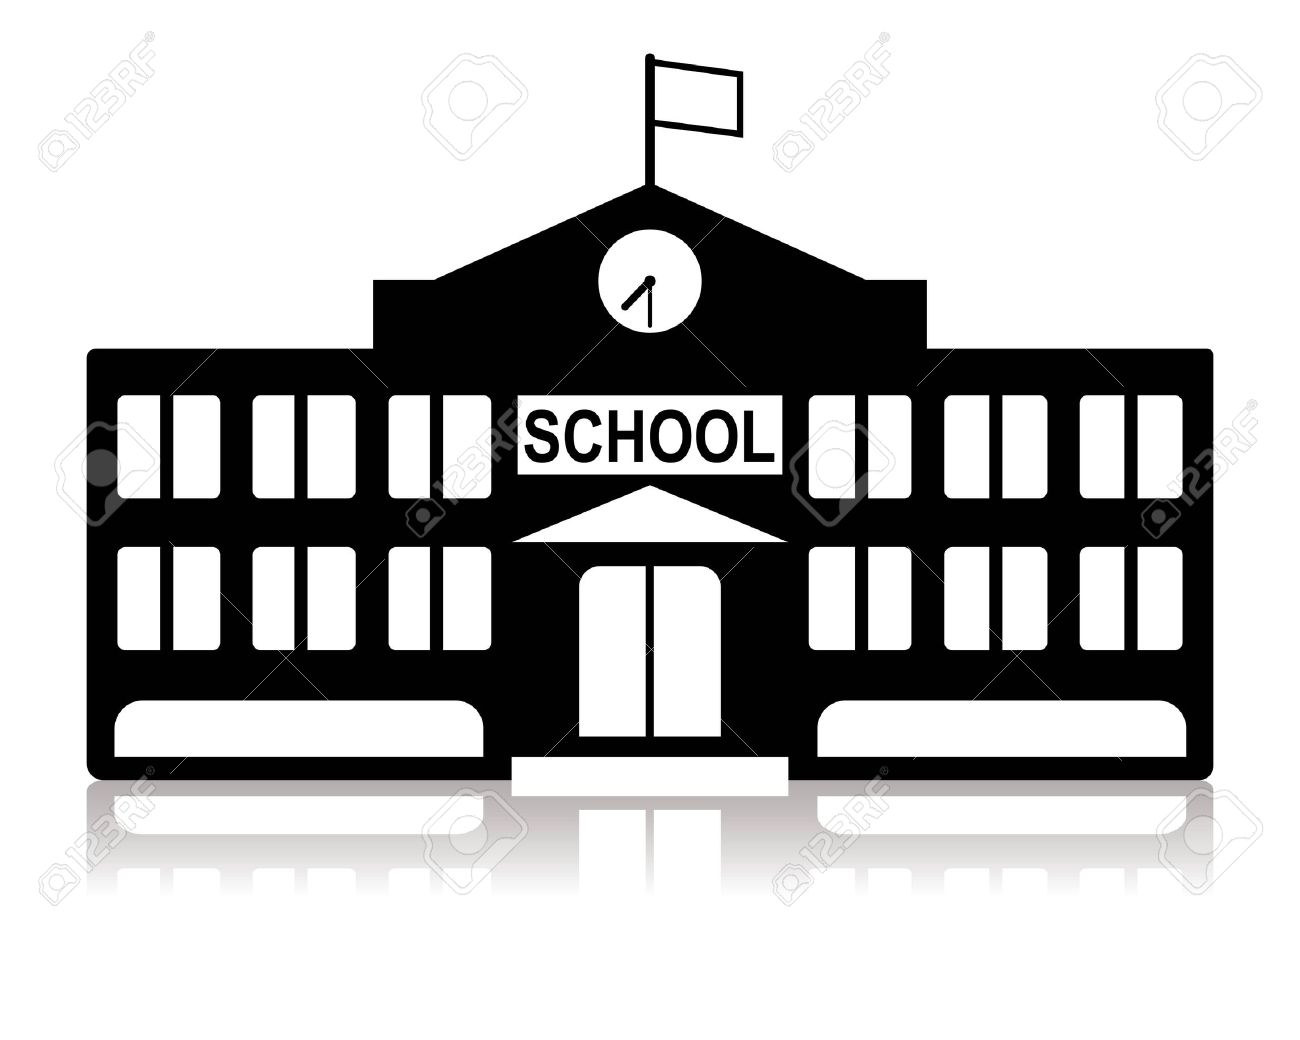 School Building ClipArt Black And White